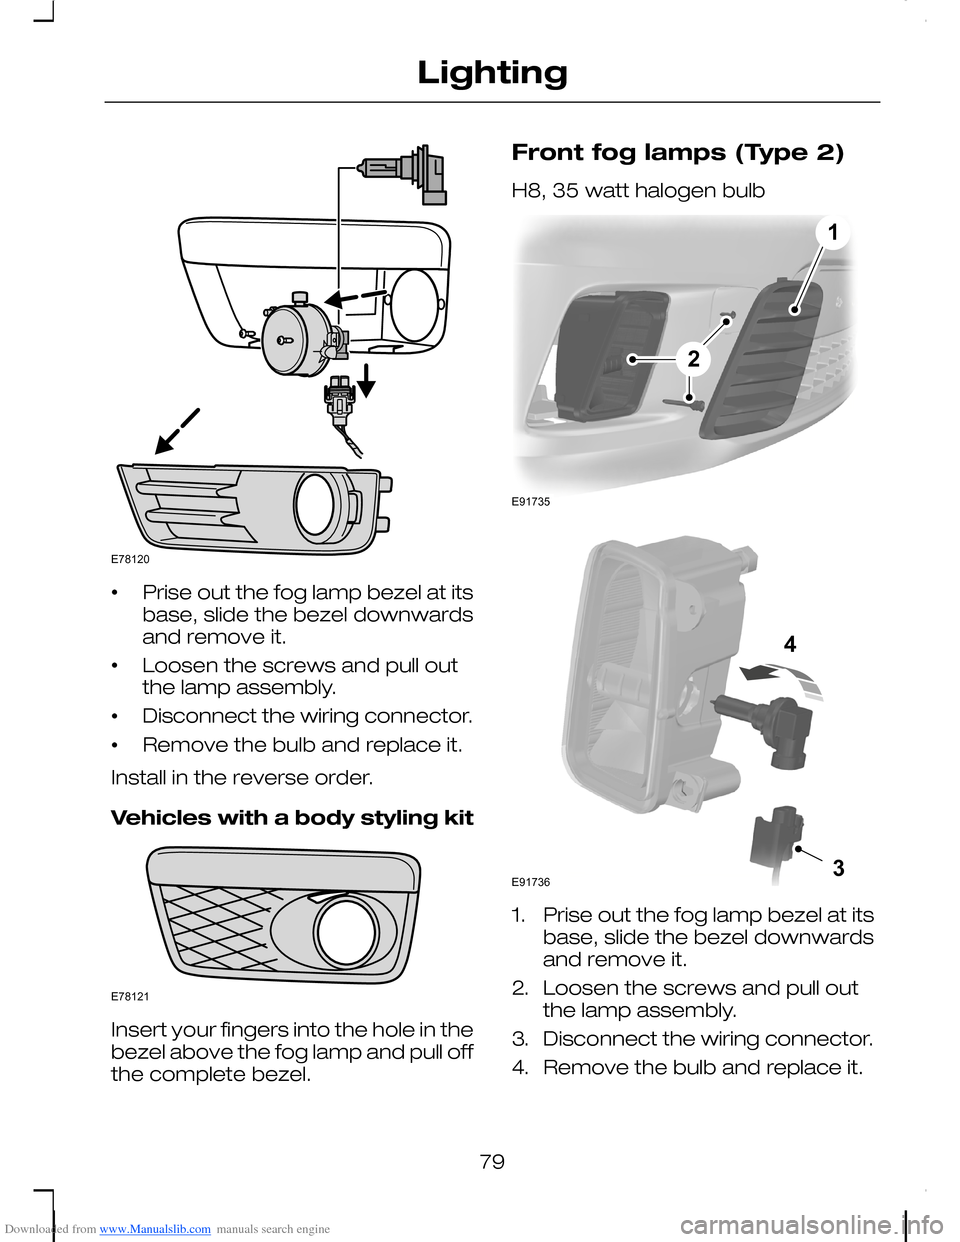 FORD C MAX 2008 1.G Manual Online Downloaded from www.Manualslib.com manuals search engine •Prise out the fog lamp bezel at itsbase, slide the bezel downwardsand remove it.
•Loosen the screws and pull outthe lamp assembly.
•Disc